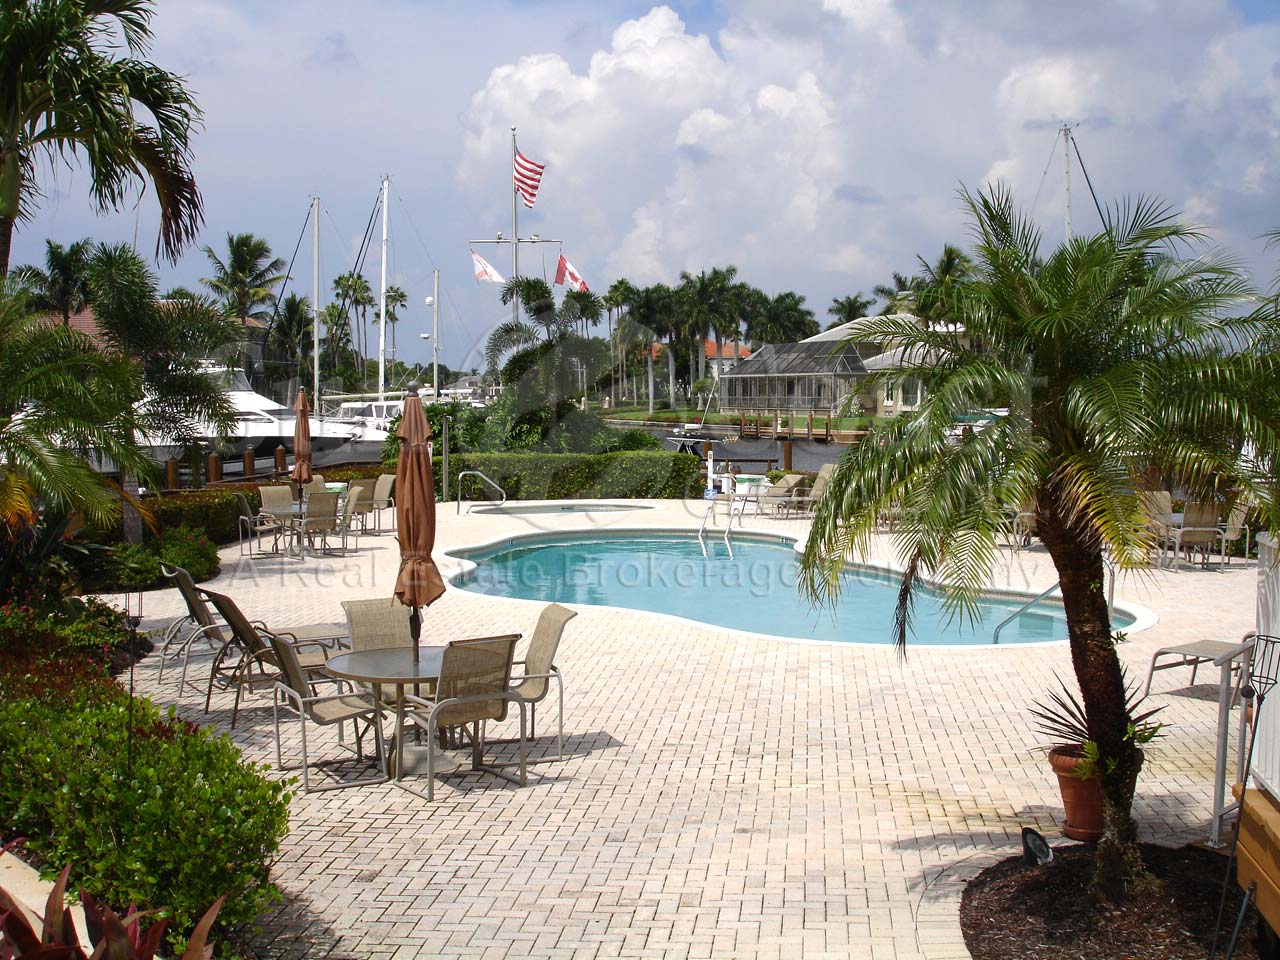 WINDSTAR Southpointe Yacht Club pool and hot tub